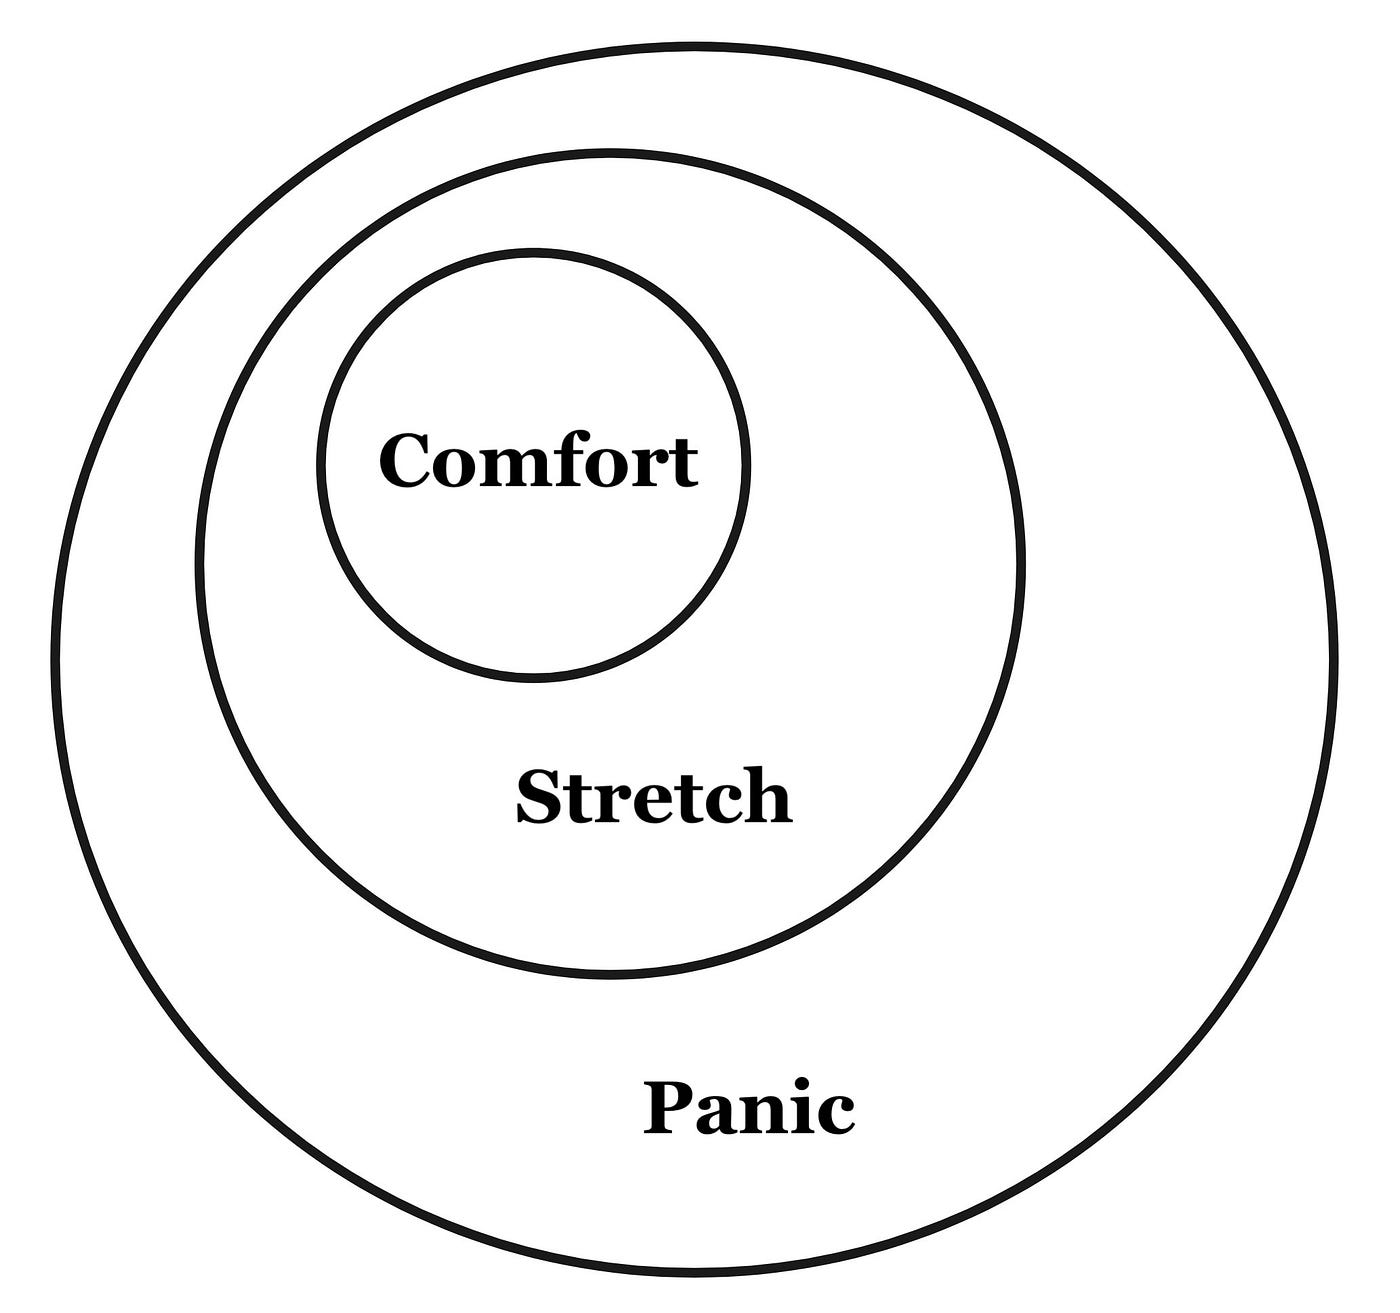 Optimal Learning Exists Between Comfort and Panic